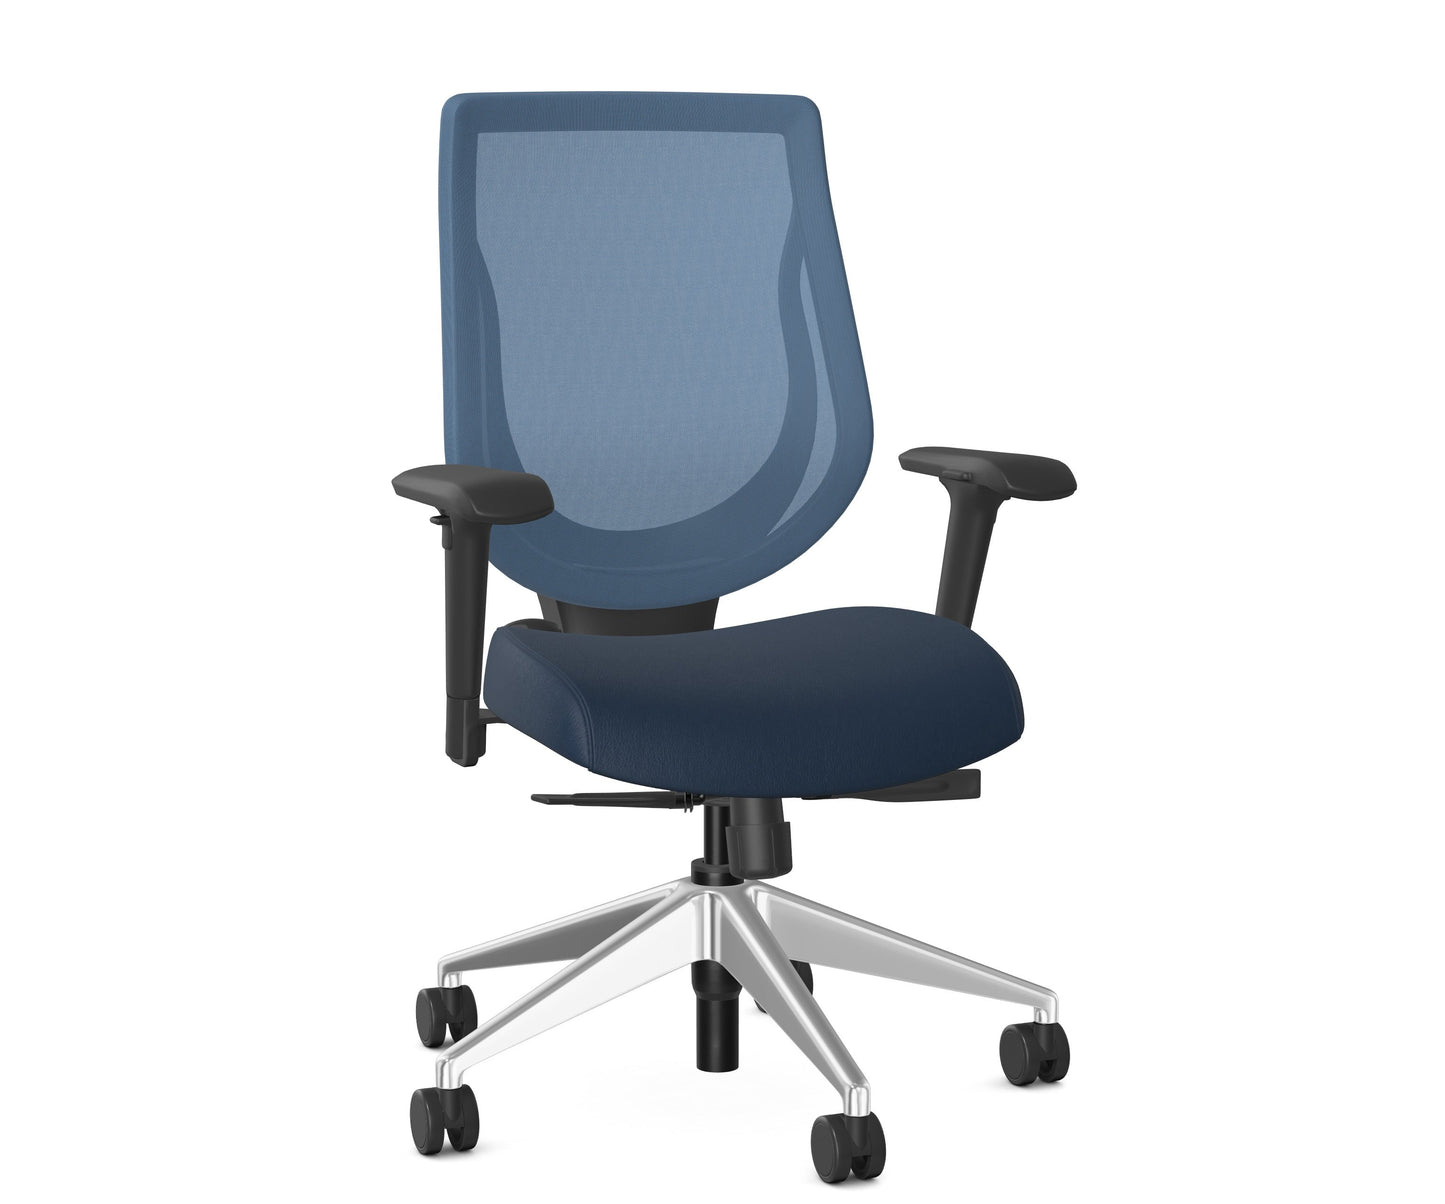 You Mid-Back Ergonomic Office Chair